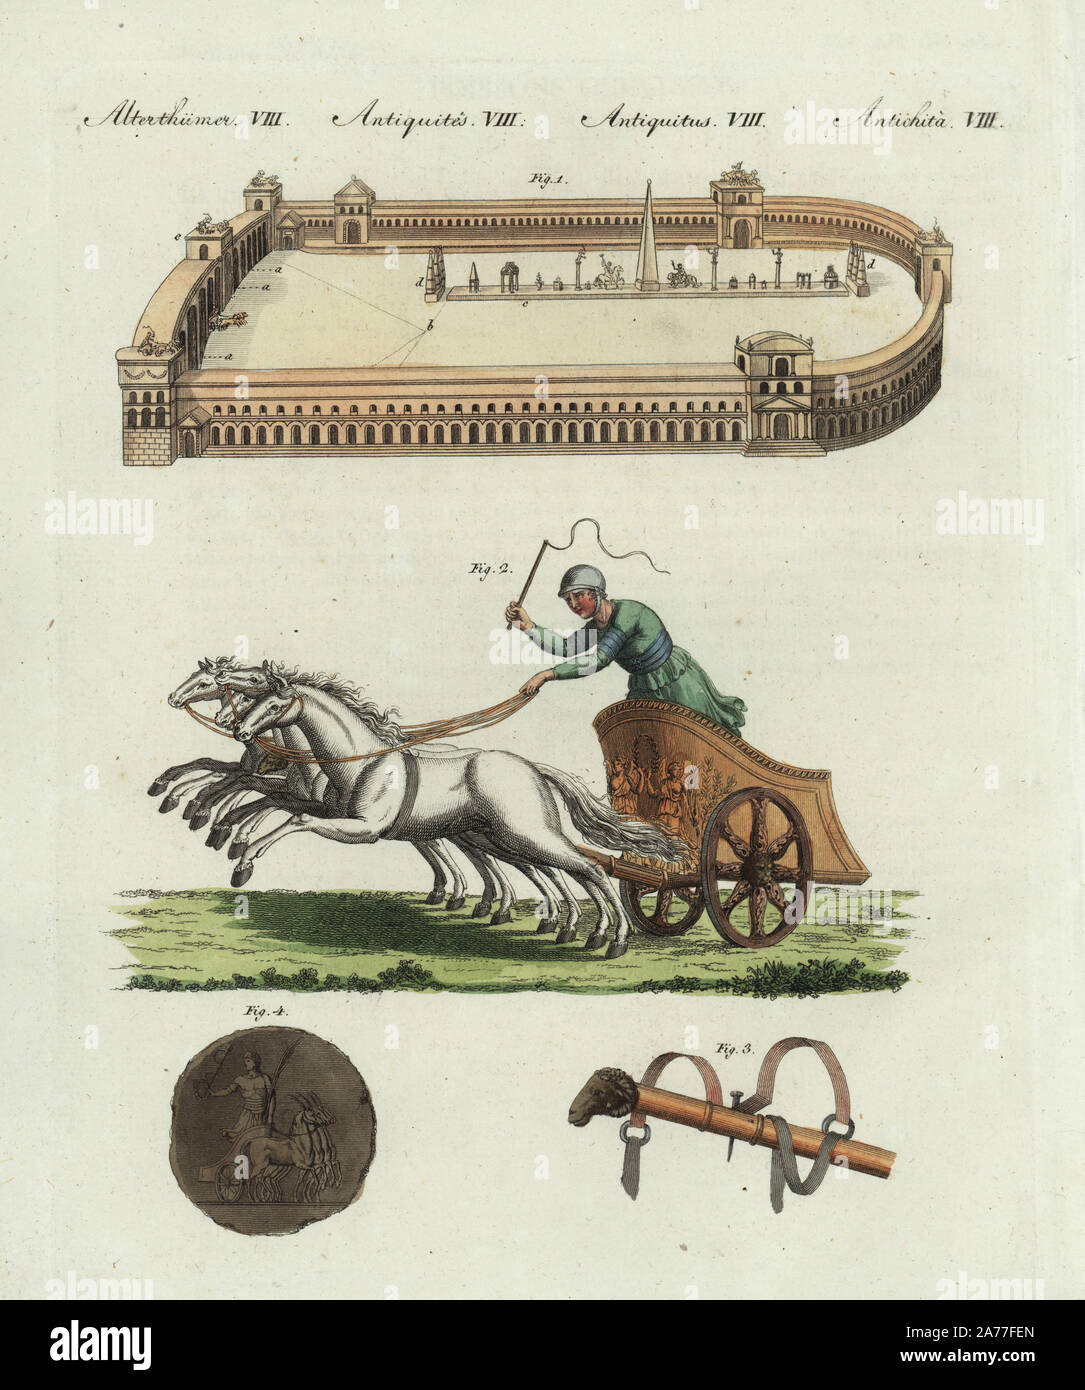 Ancient Roman Circus or games arena 1, four-horse chariot or quadriga 2, chariot yoke with ram's head 3, and bronze medal to honour the victor 4. Handcoloured copperplate engraving from Friedrich Johann Bertuch's Bilderbuch fur Kinder (Picture Book for Children), Weimar, 1802. Stock Photo